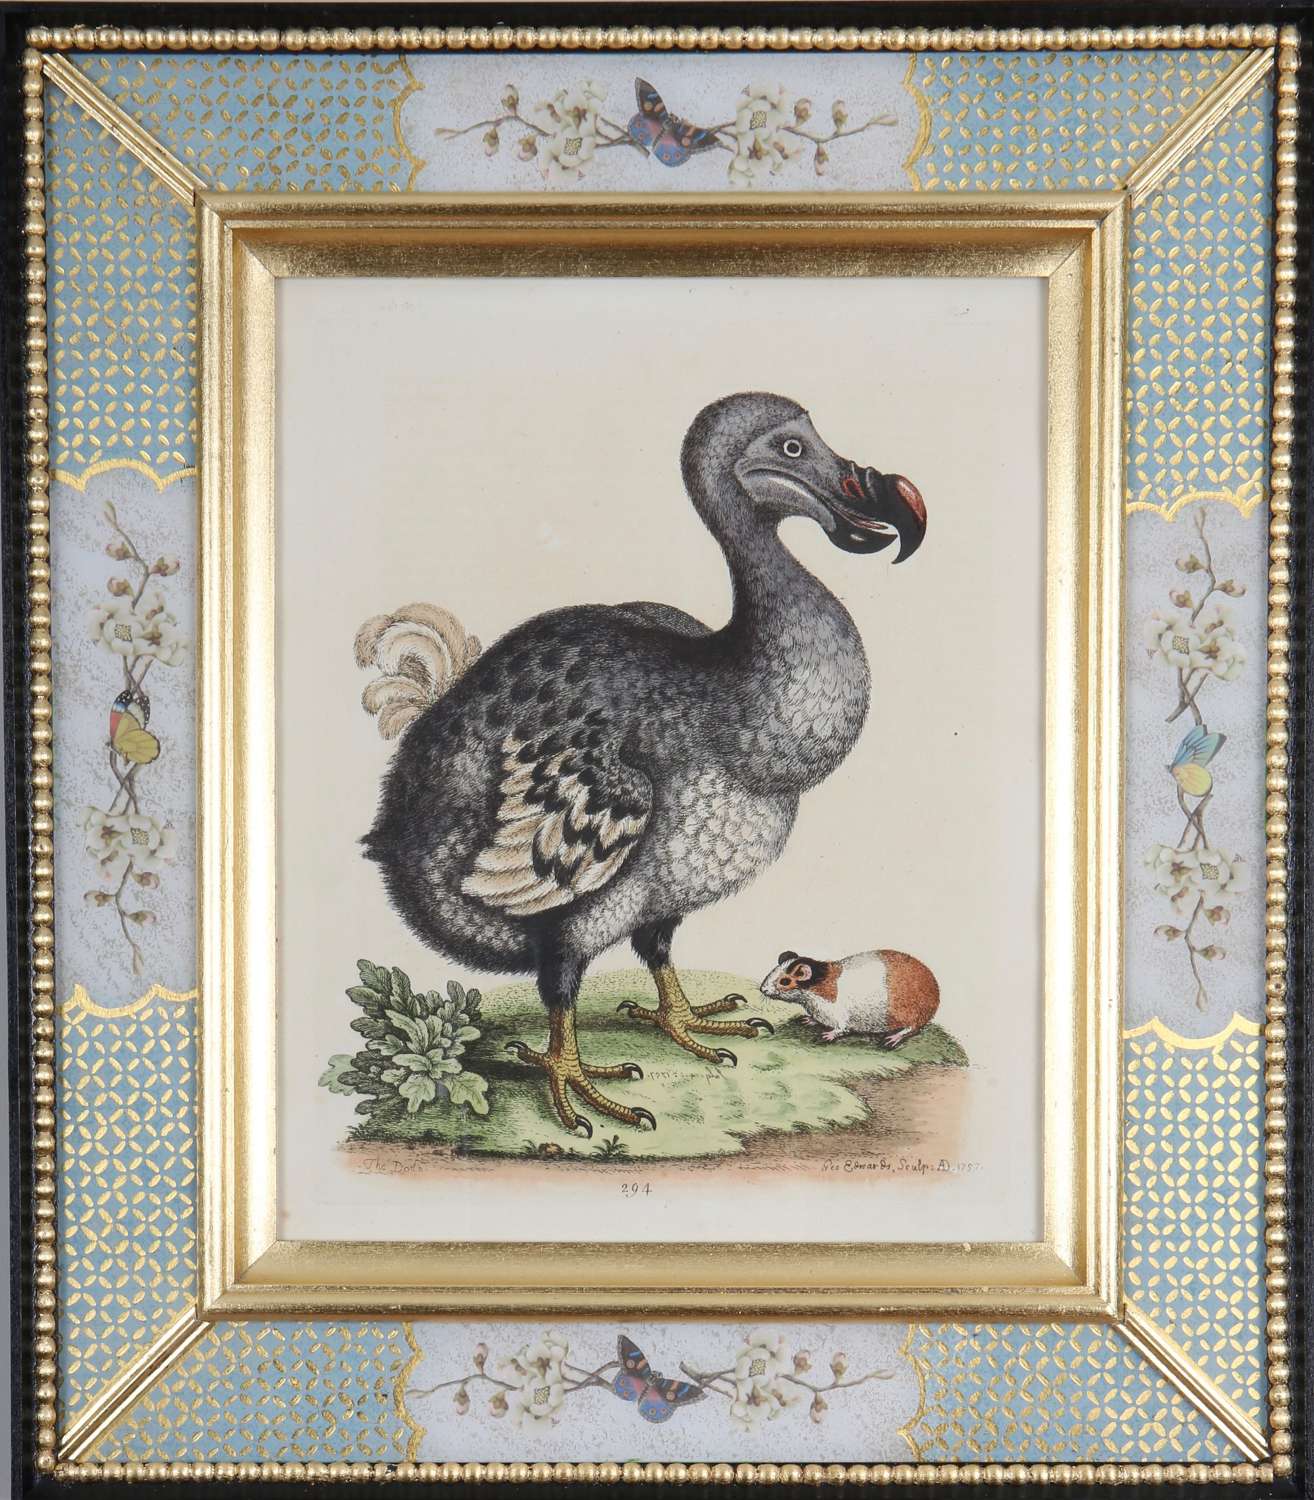 George Edwards: c18th engraving of a dodo in a decalcomania frame